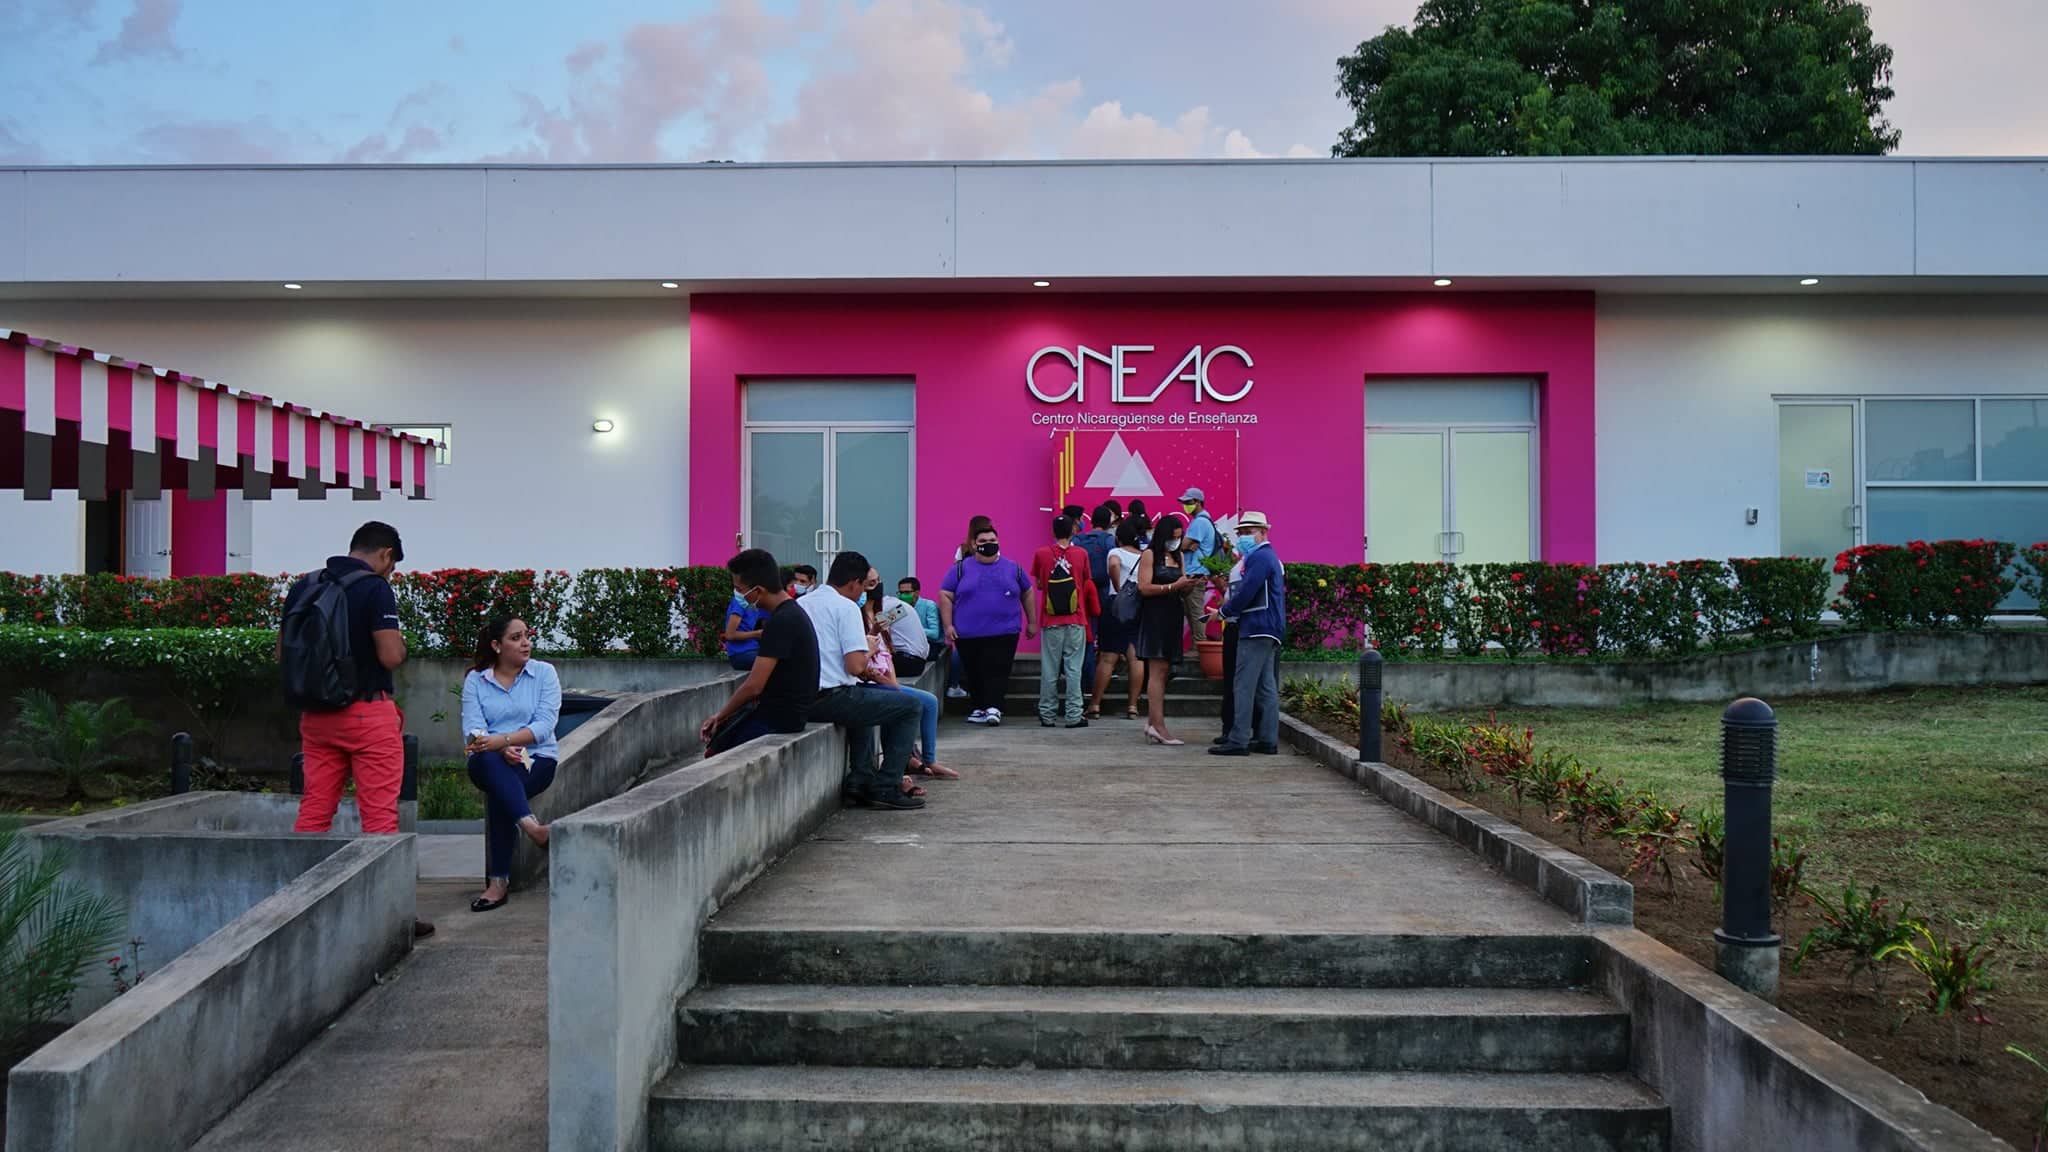 Filmmakers fear “new censorship power” of audiovisual productions in Nicaragua